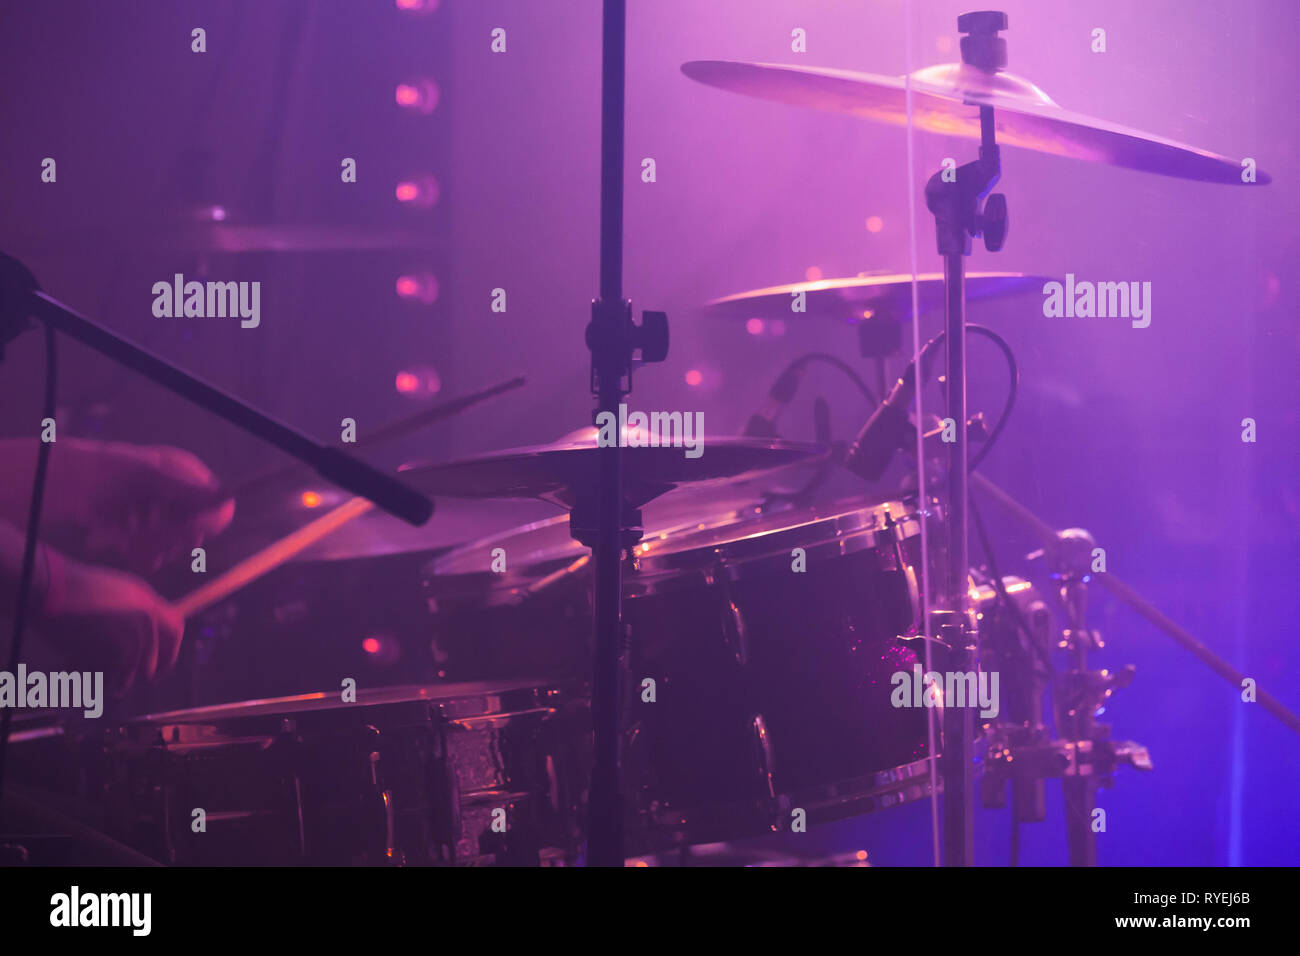 Live music photo background, rock drum set with cymbals in purple stage lights. Closeup photo, soft selective focus Stock Photo